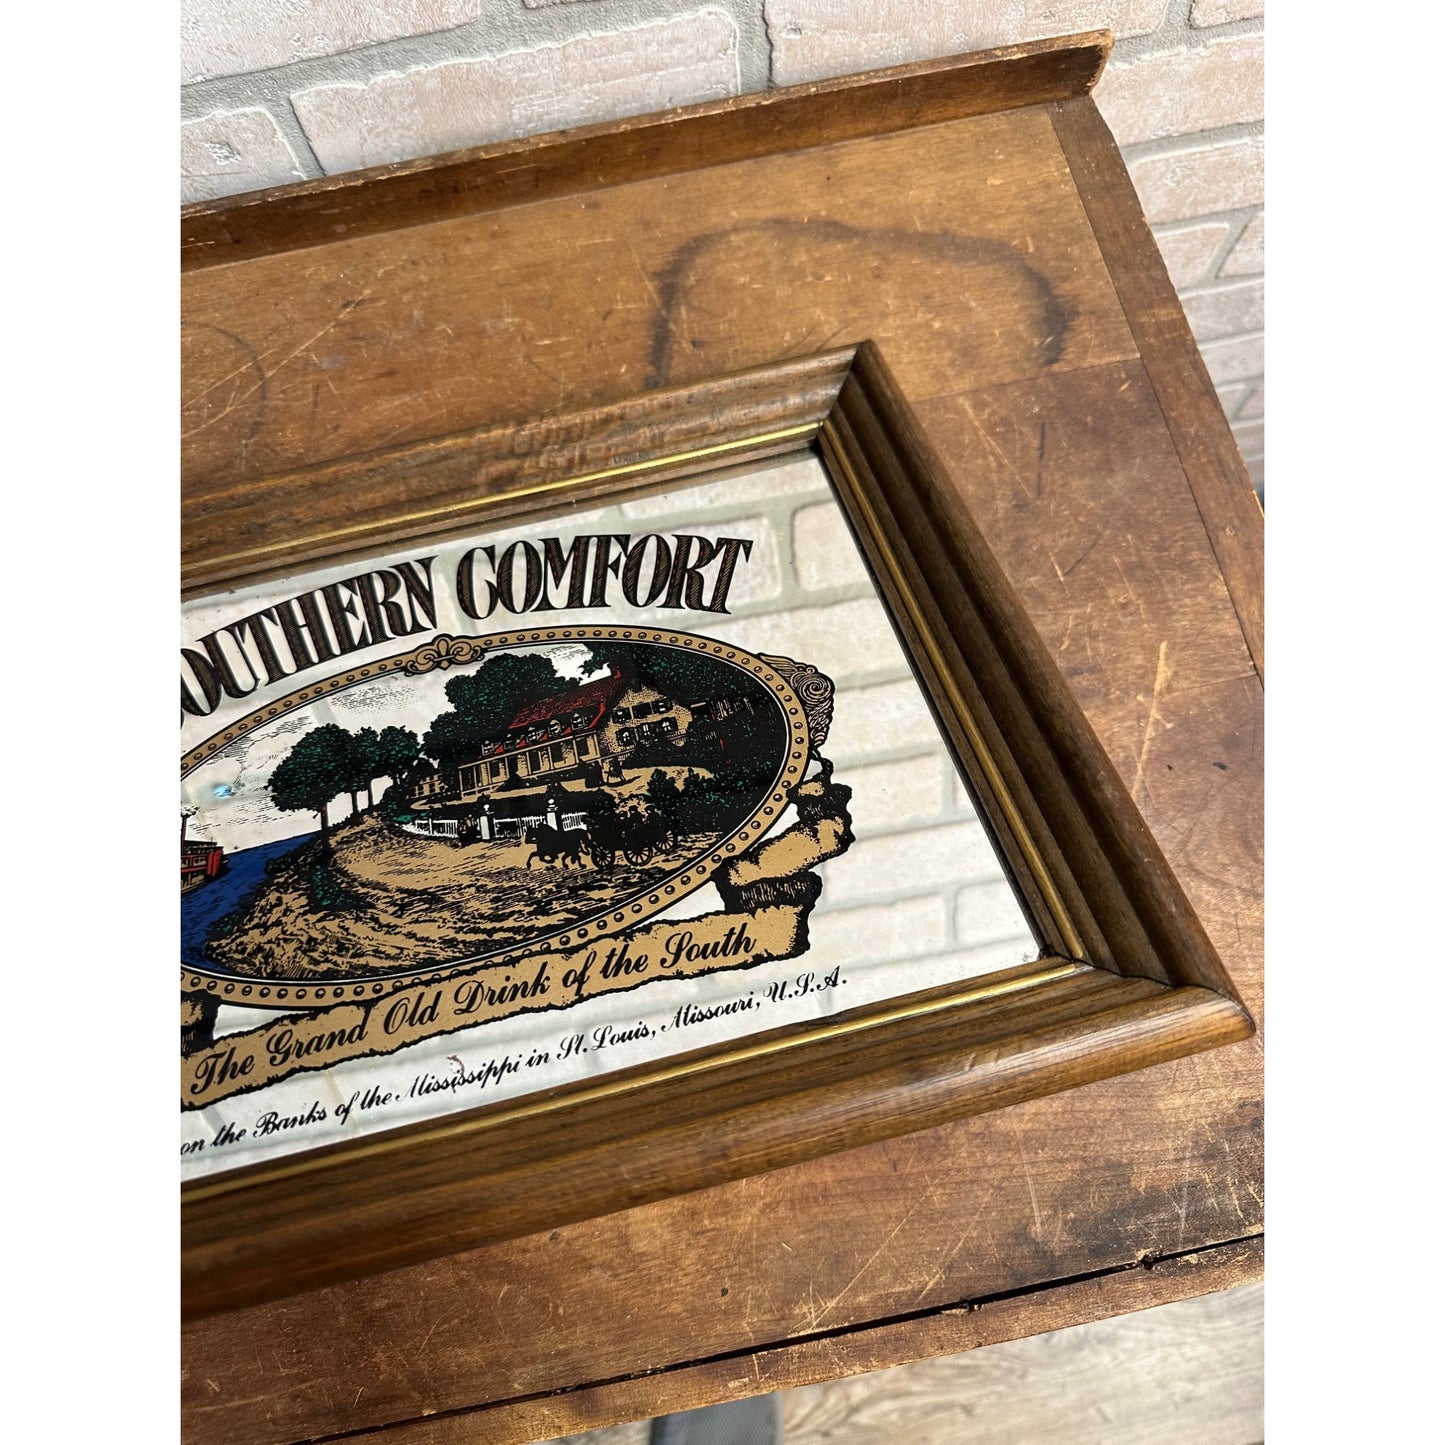 Vintage Southern Comfort Whiskey Bar Pub Wall Advertising Mirror Sign 14.5x11.5